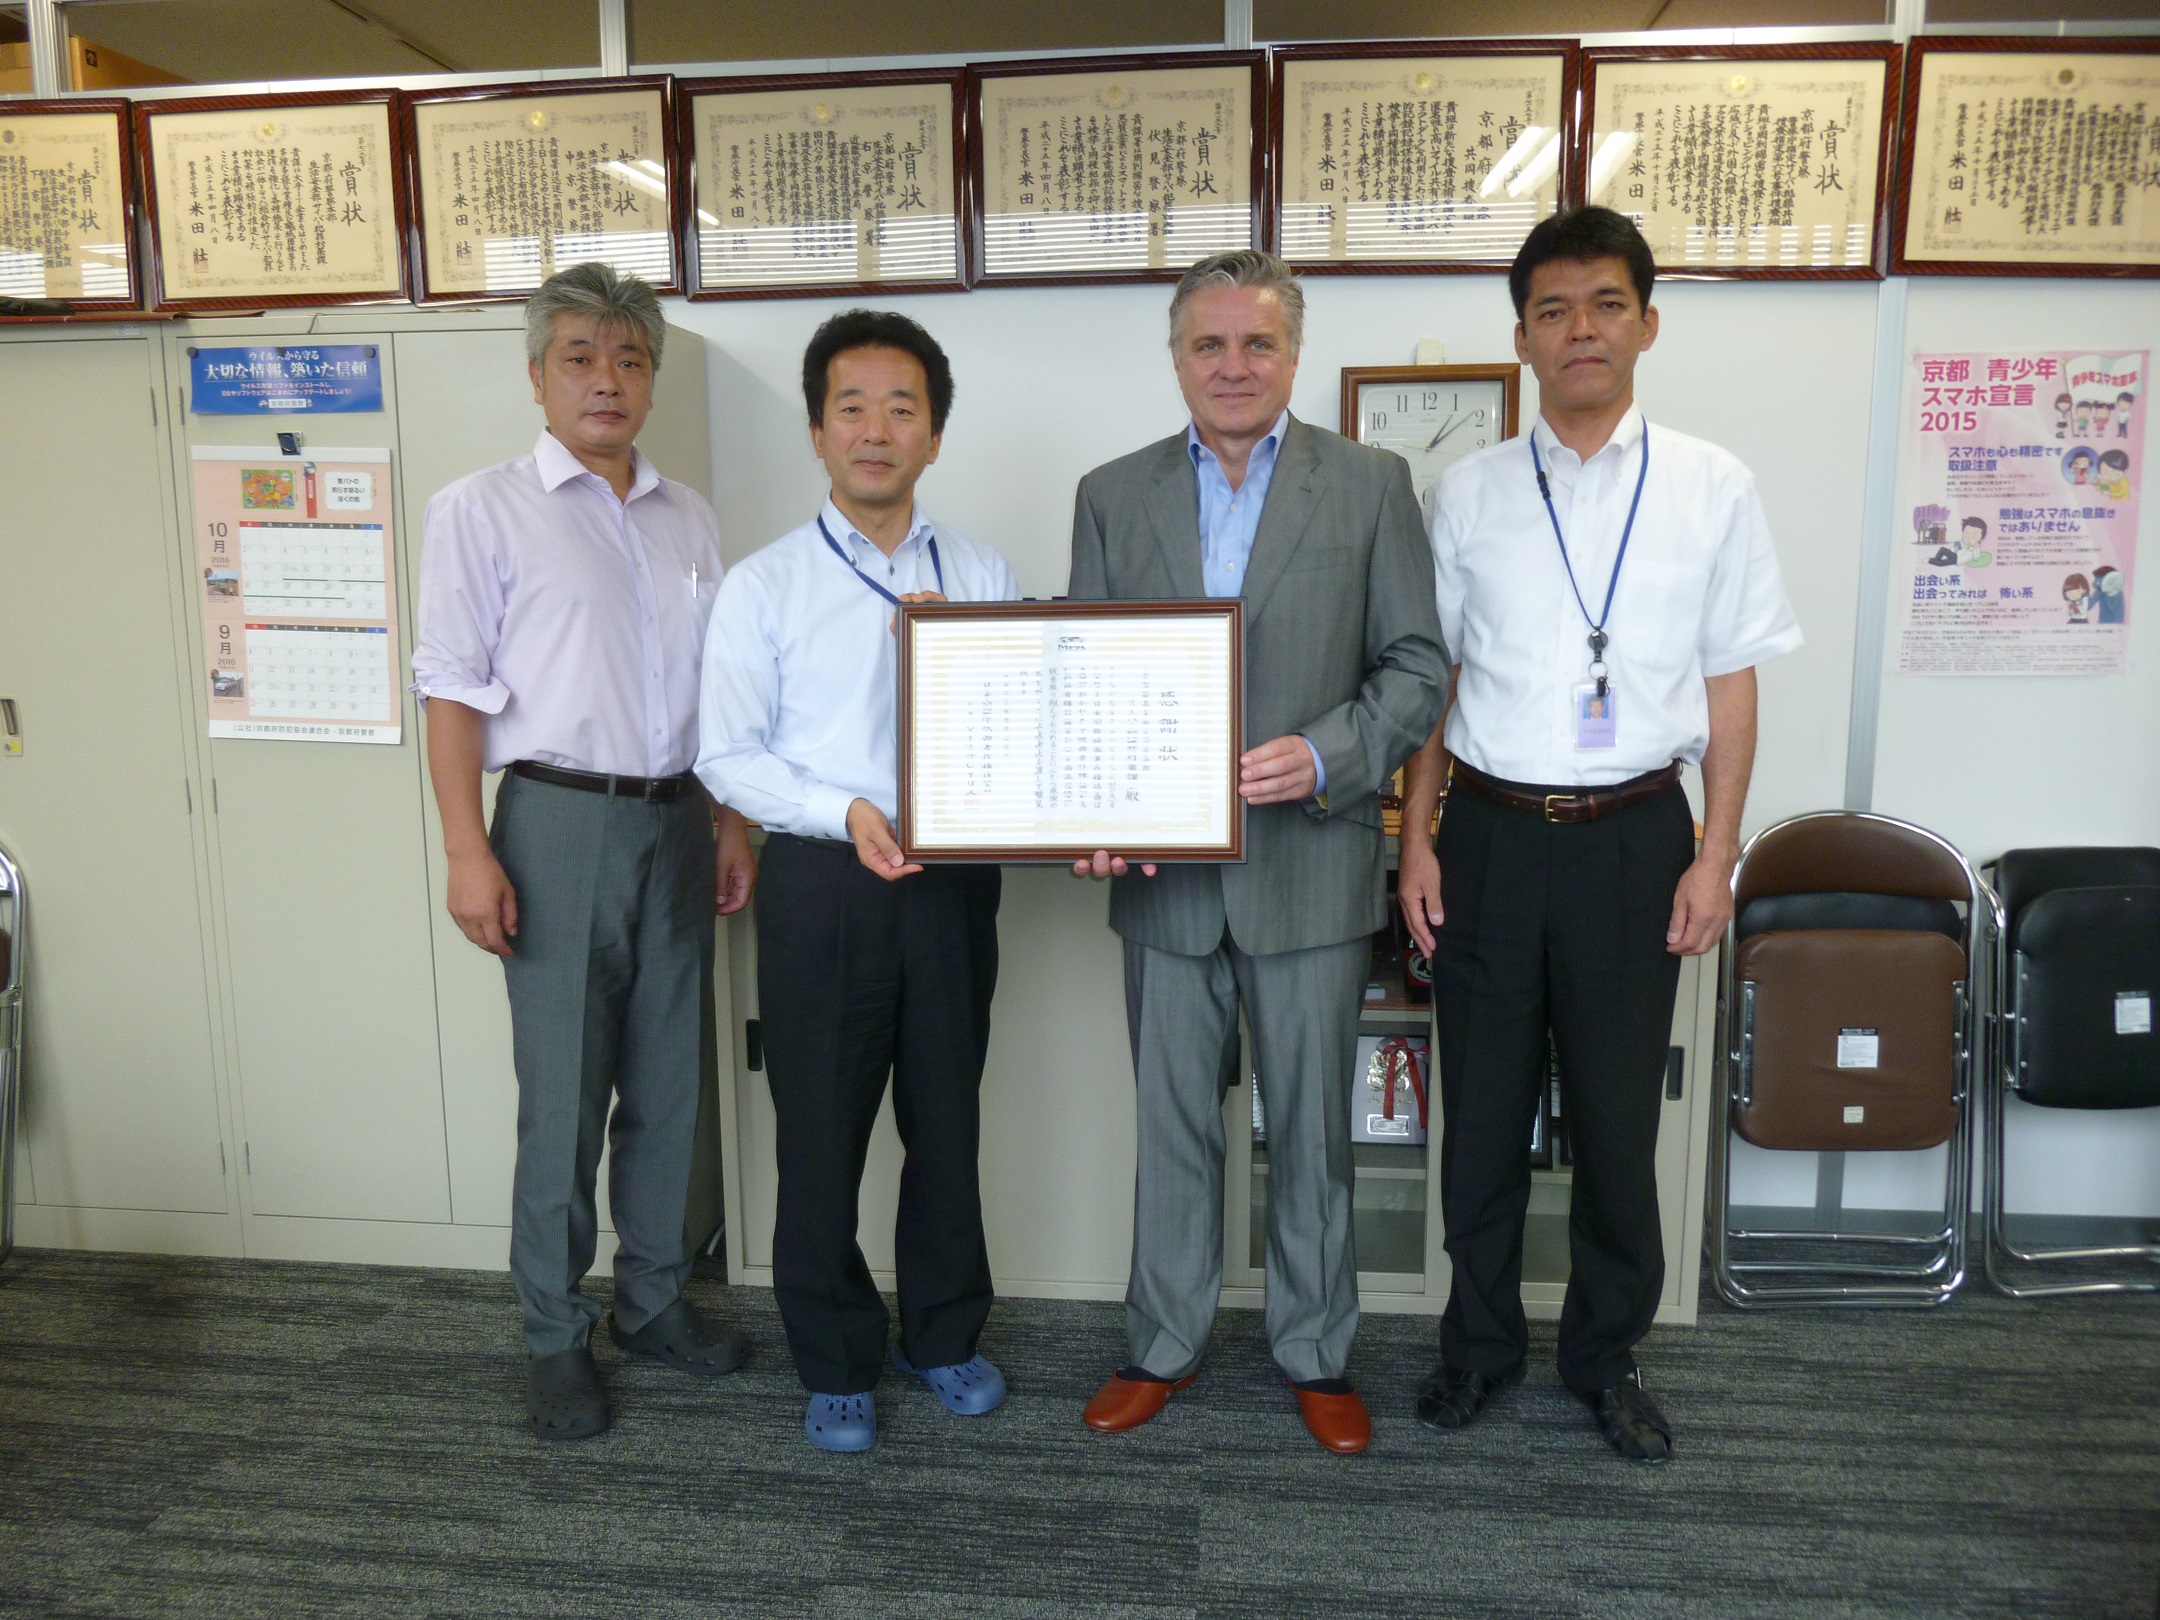 Mr. Michael C. Ellis, President and Managing Director, Asia‐Pacific, Motion Picture Association (MPA), visited Japan and presented Certificates of Appreciation to the Kyoto Prefectural Police Headquarters Cyber Crime Division and Fushimi Police Station